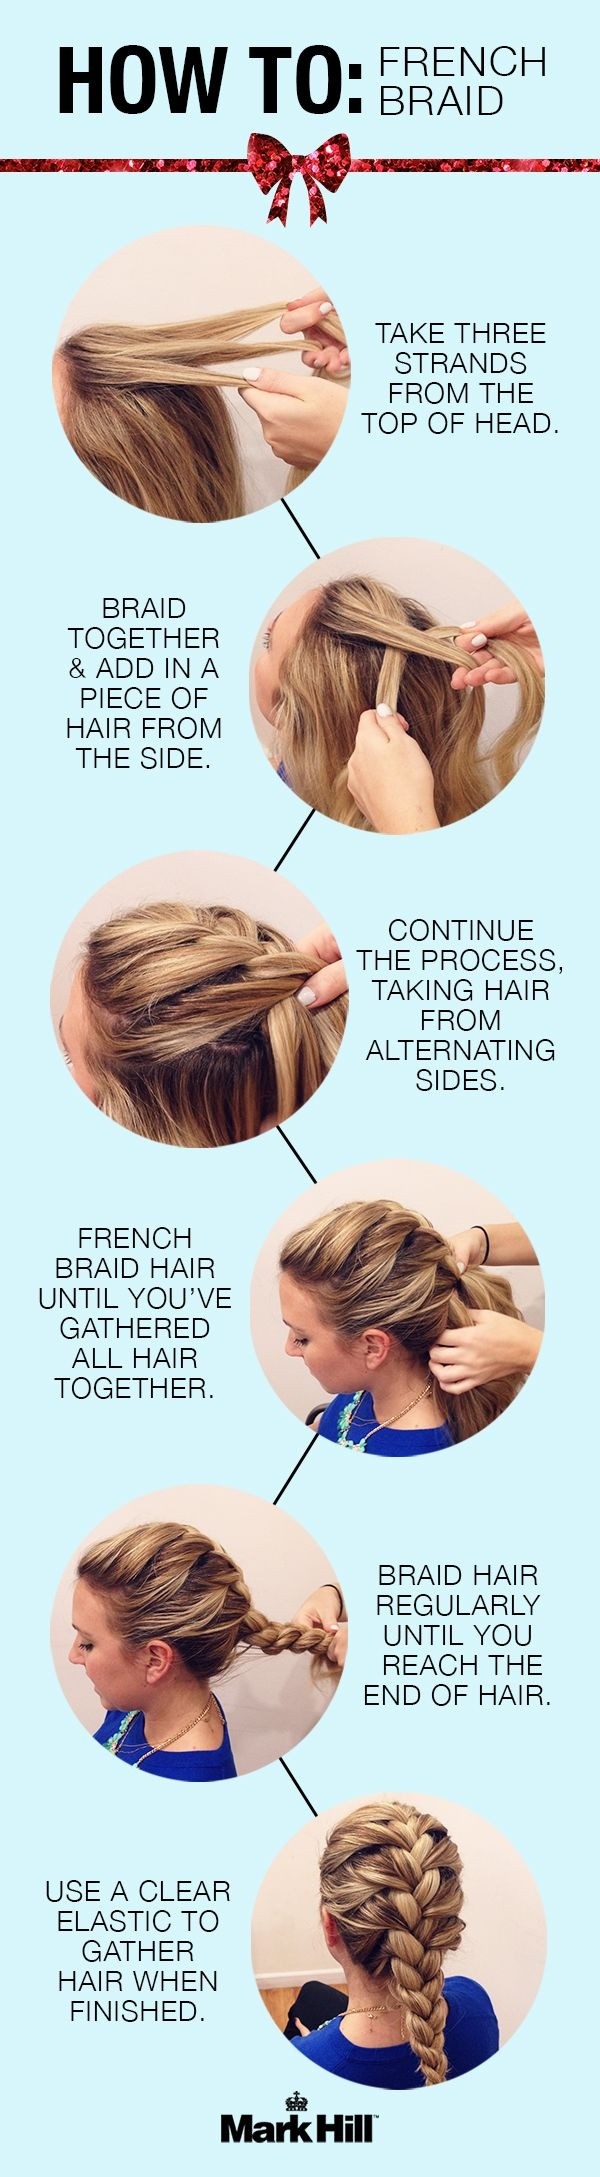 Classic French Braid Hairstyle Tutorial